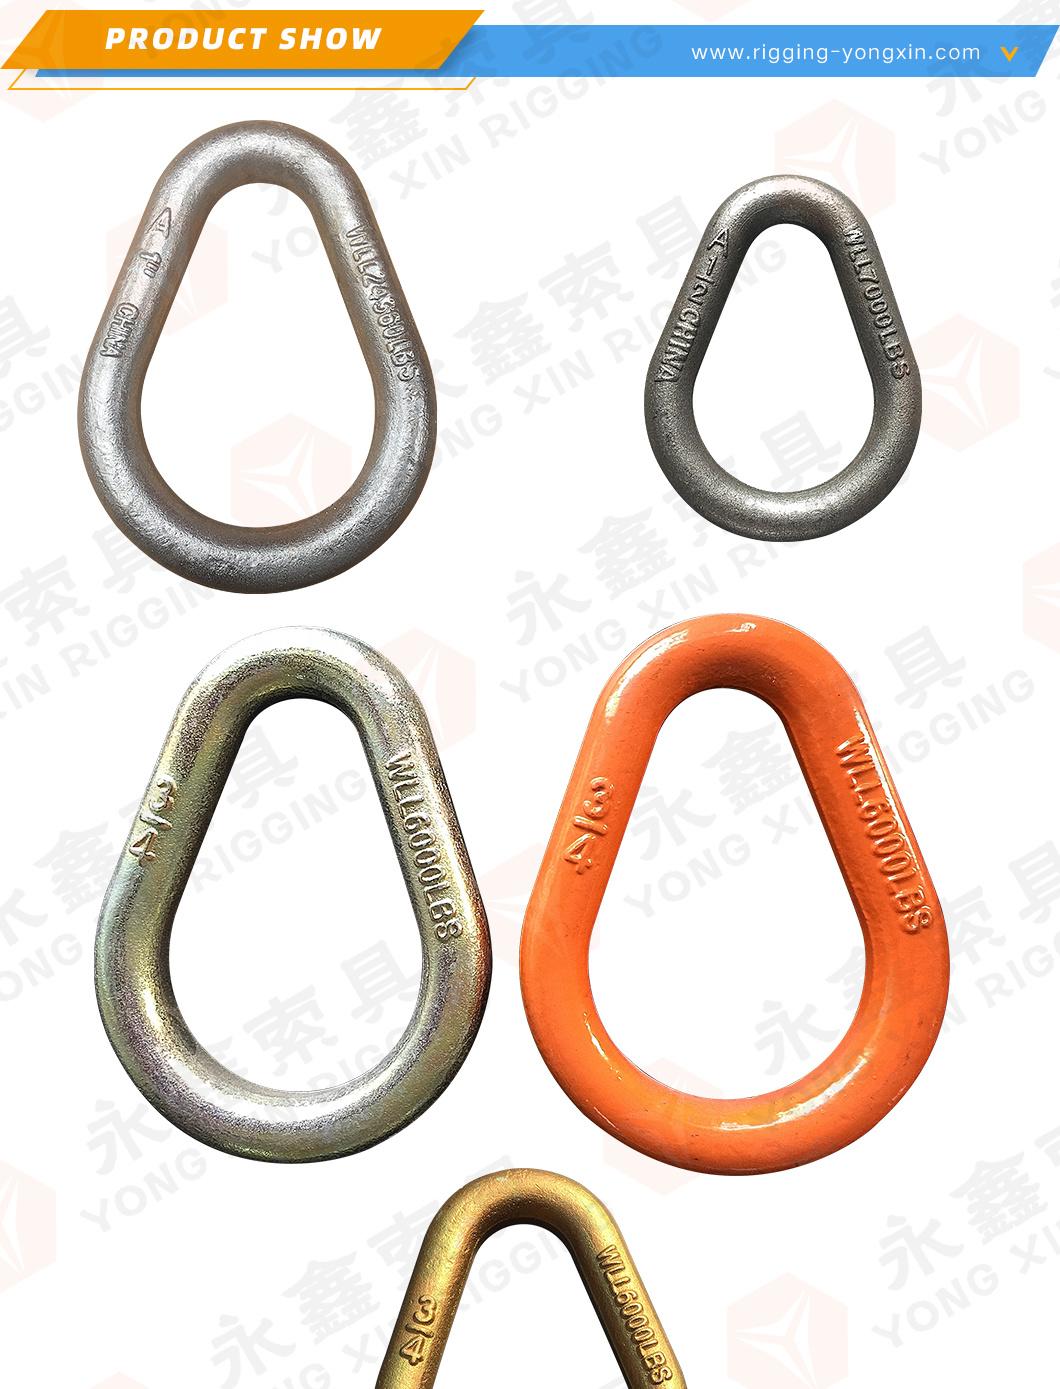 Hot Sale Rigging Alloy Steel Forged Pear Shaped Lifting Master Link for Chain